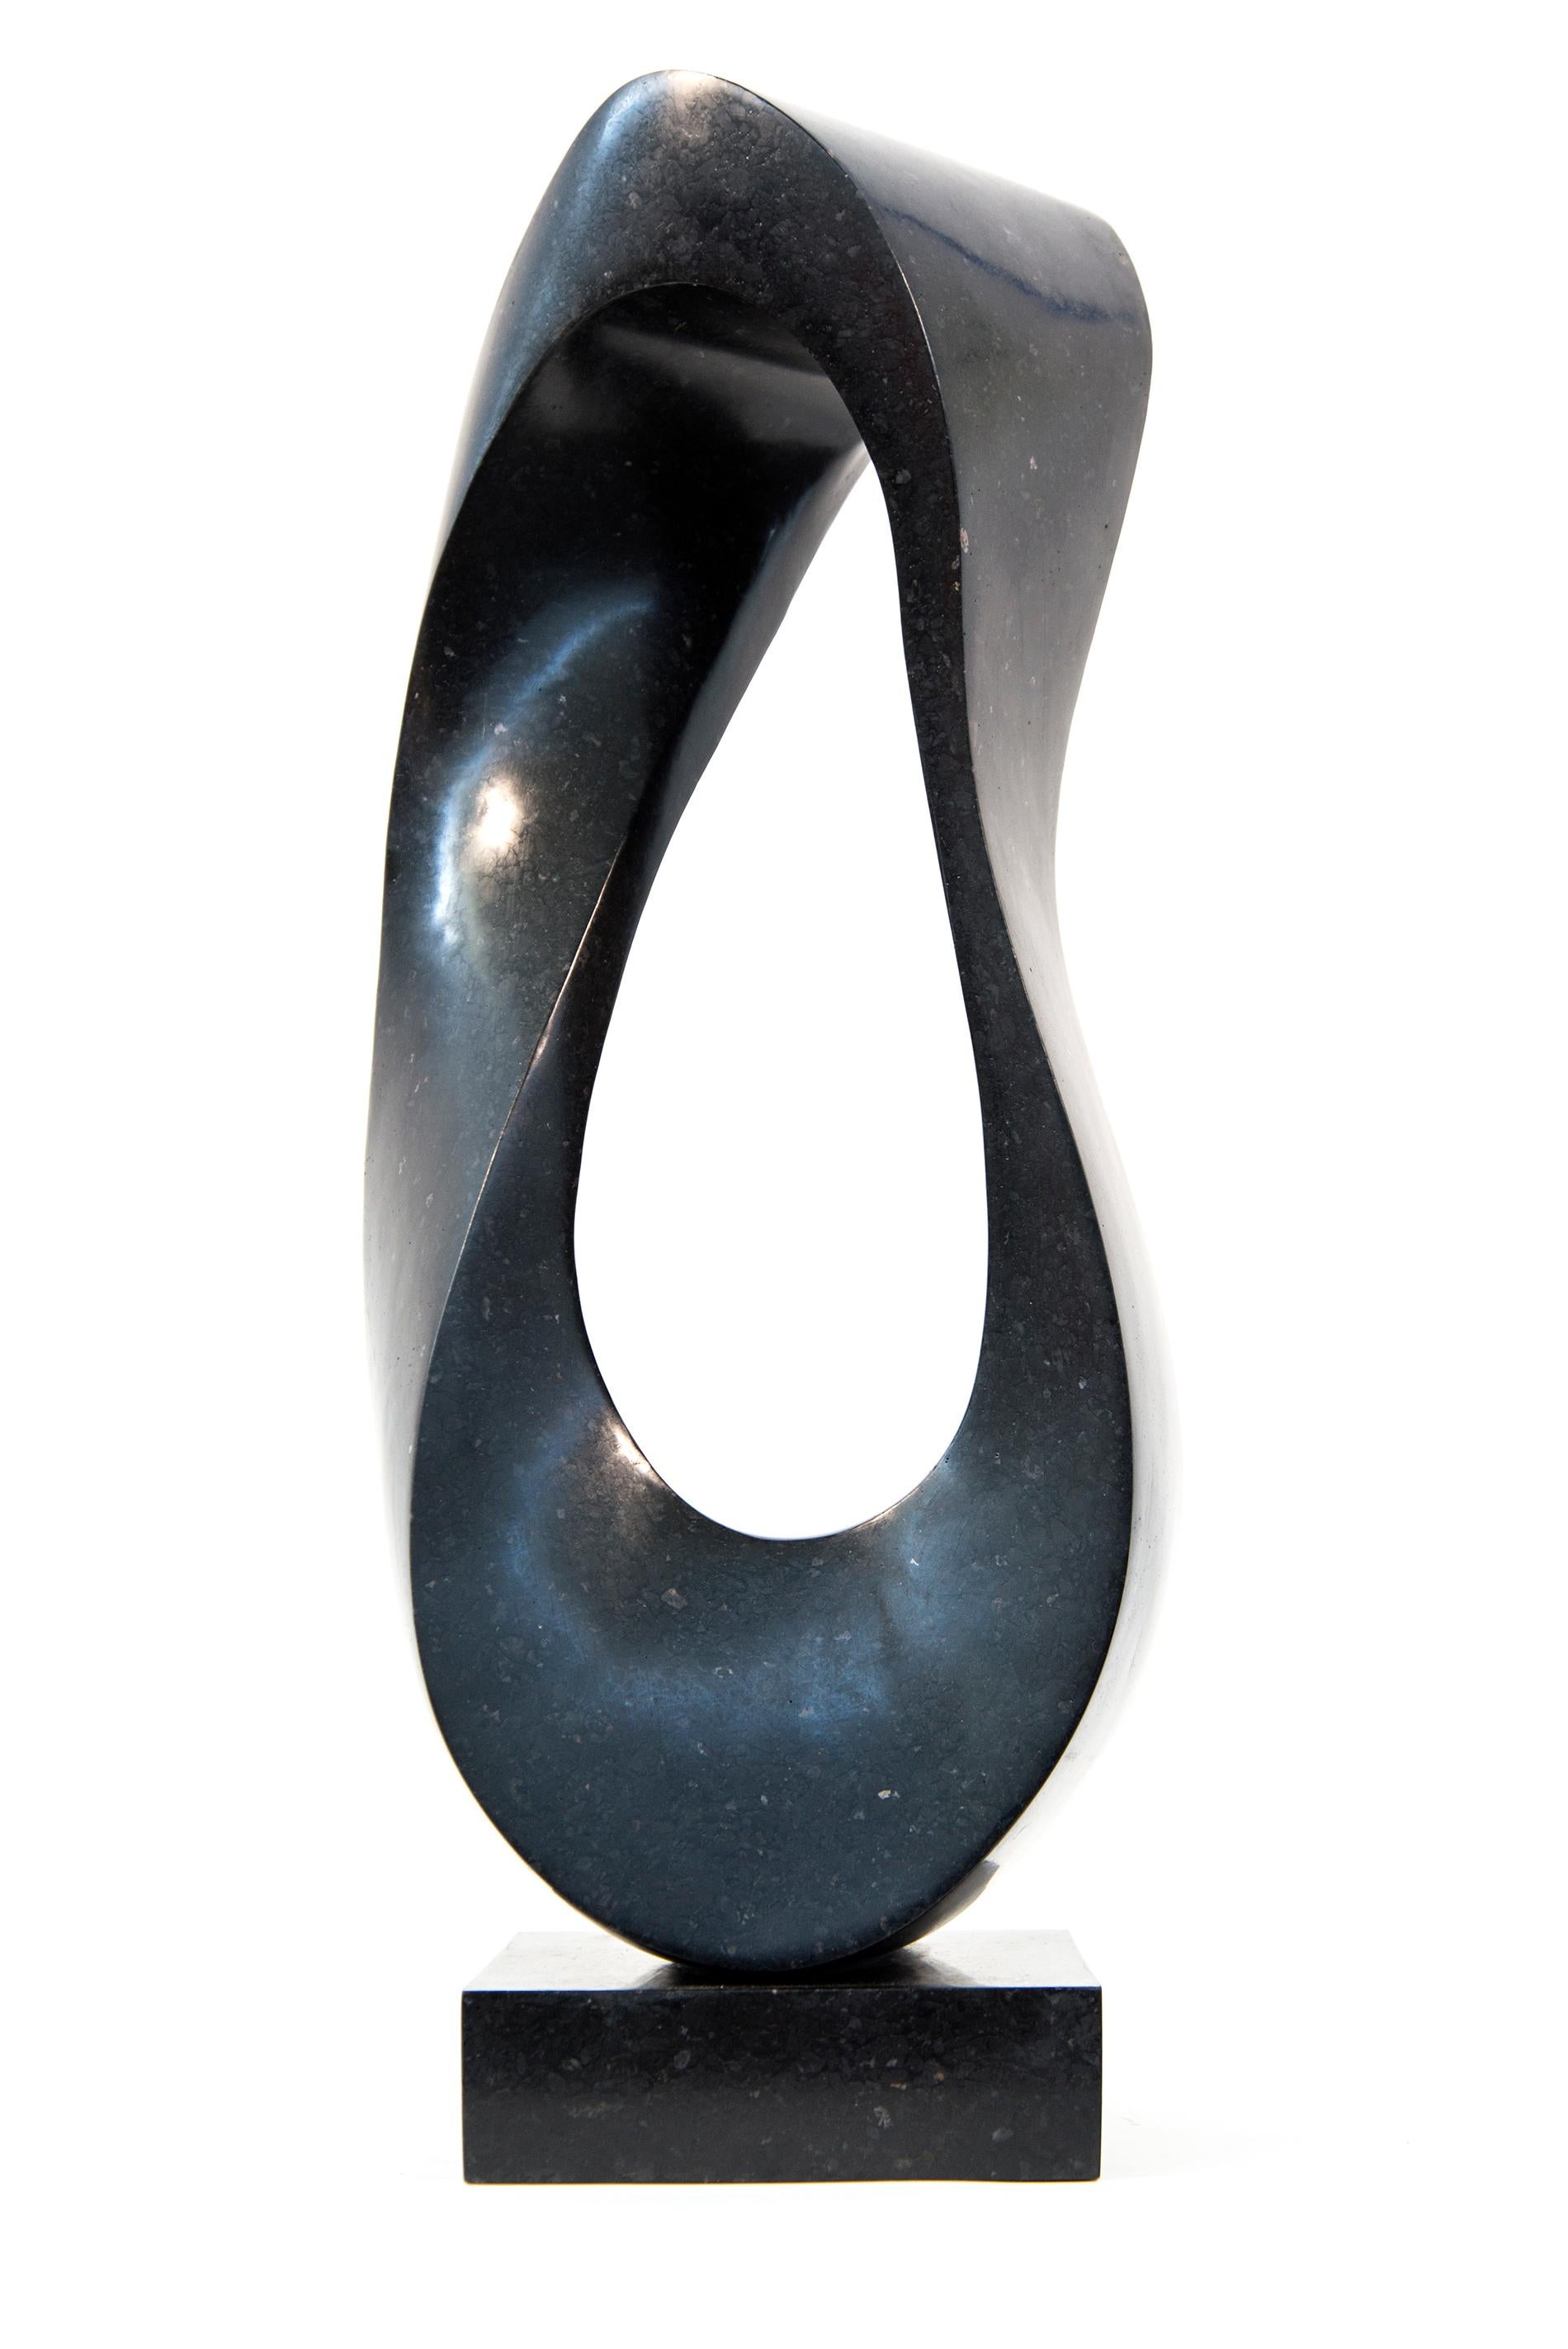 Mobius Minor 1/50 - dark, smooth, polished, abstract, black granite sculpture For Sale 4